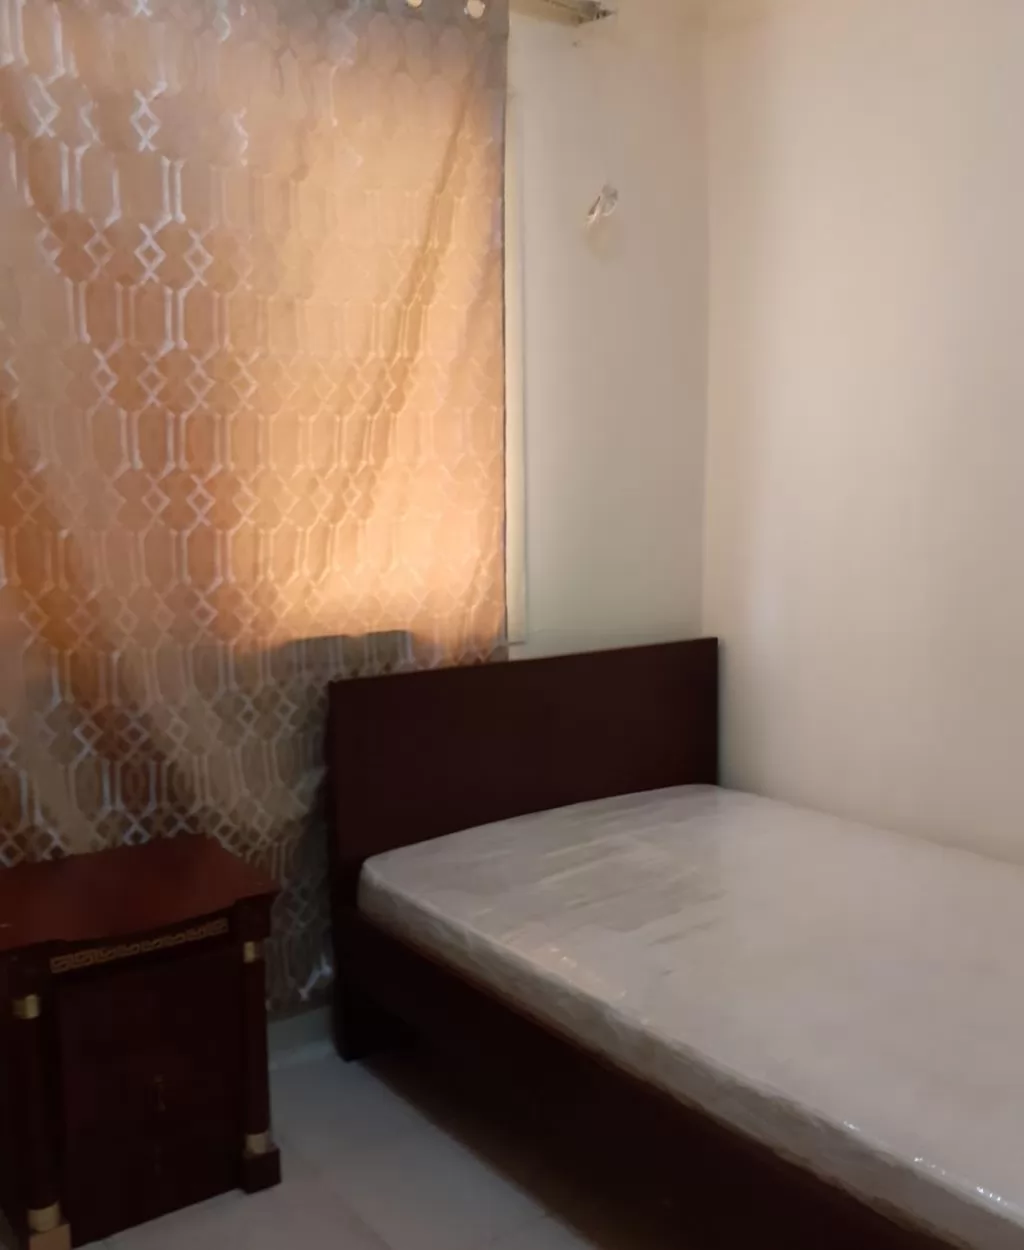 Residential Property 3 Bedrooms F/F Staff Accommodation  for rent in Al-Sadd , Doha-Qatar #19870 - 1  image 